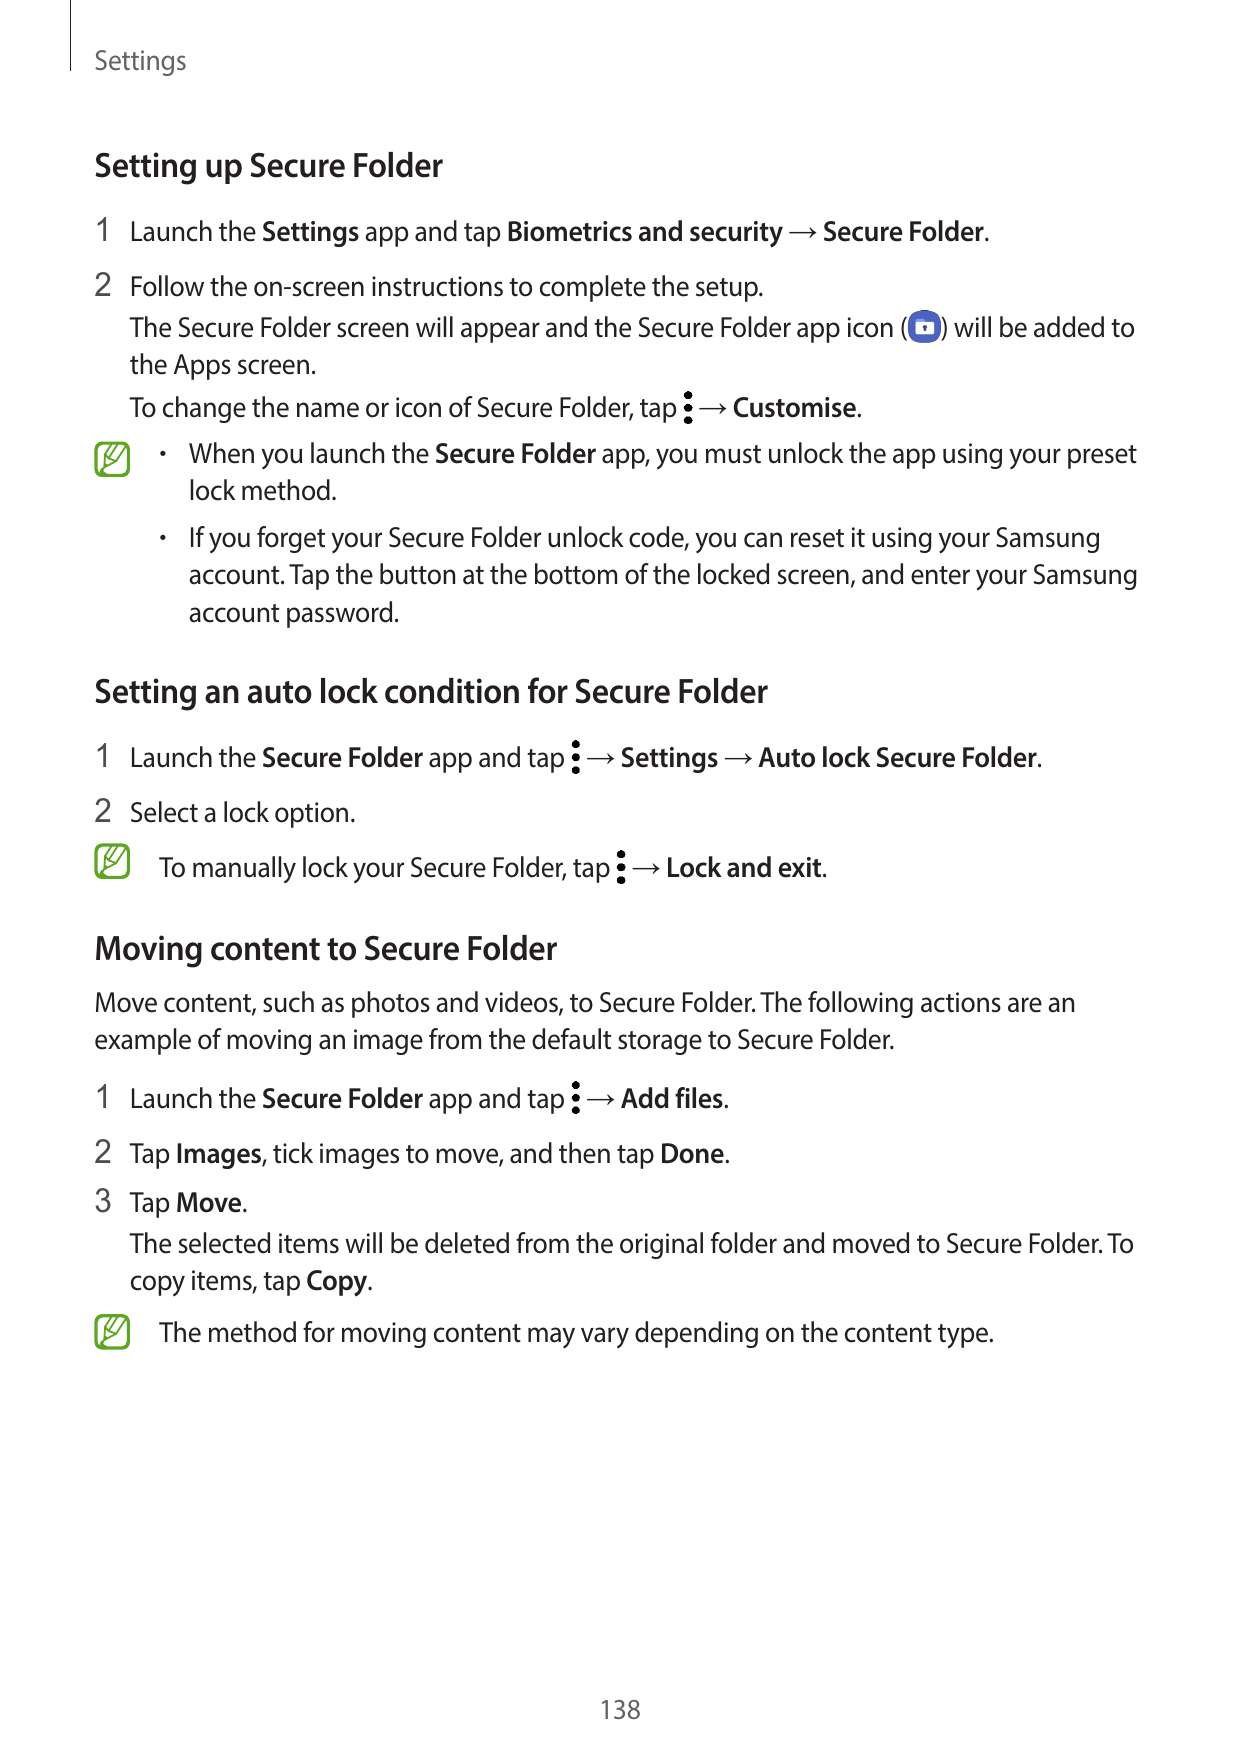 SettingsSetting up Secure Folder1 Launch the Settings app and tap Biometrics and security → Secure Folder.2 Follow the on-screen